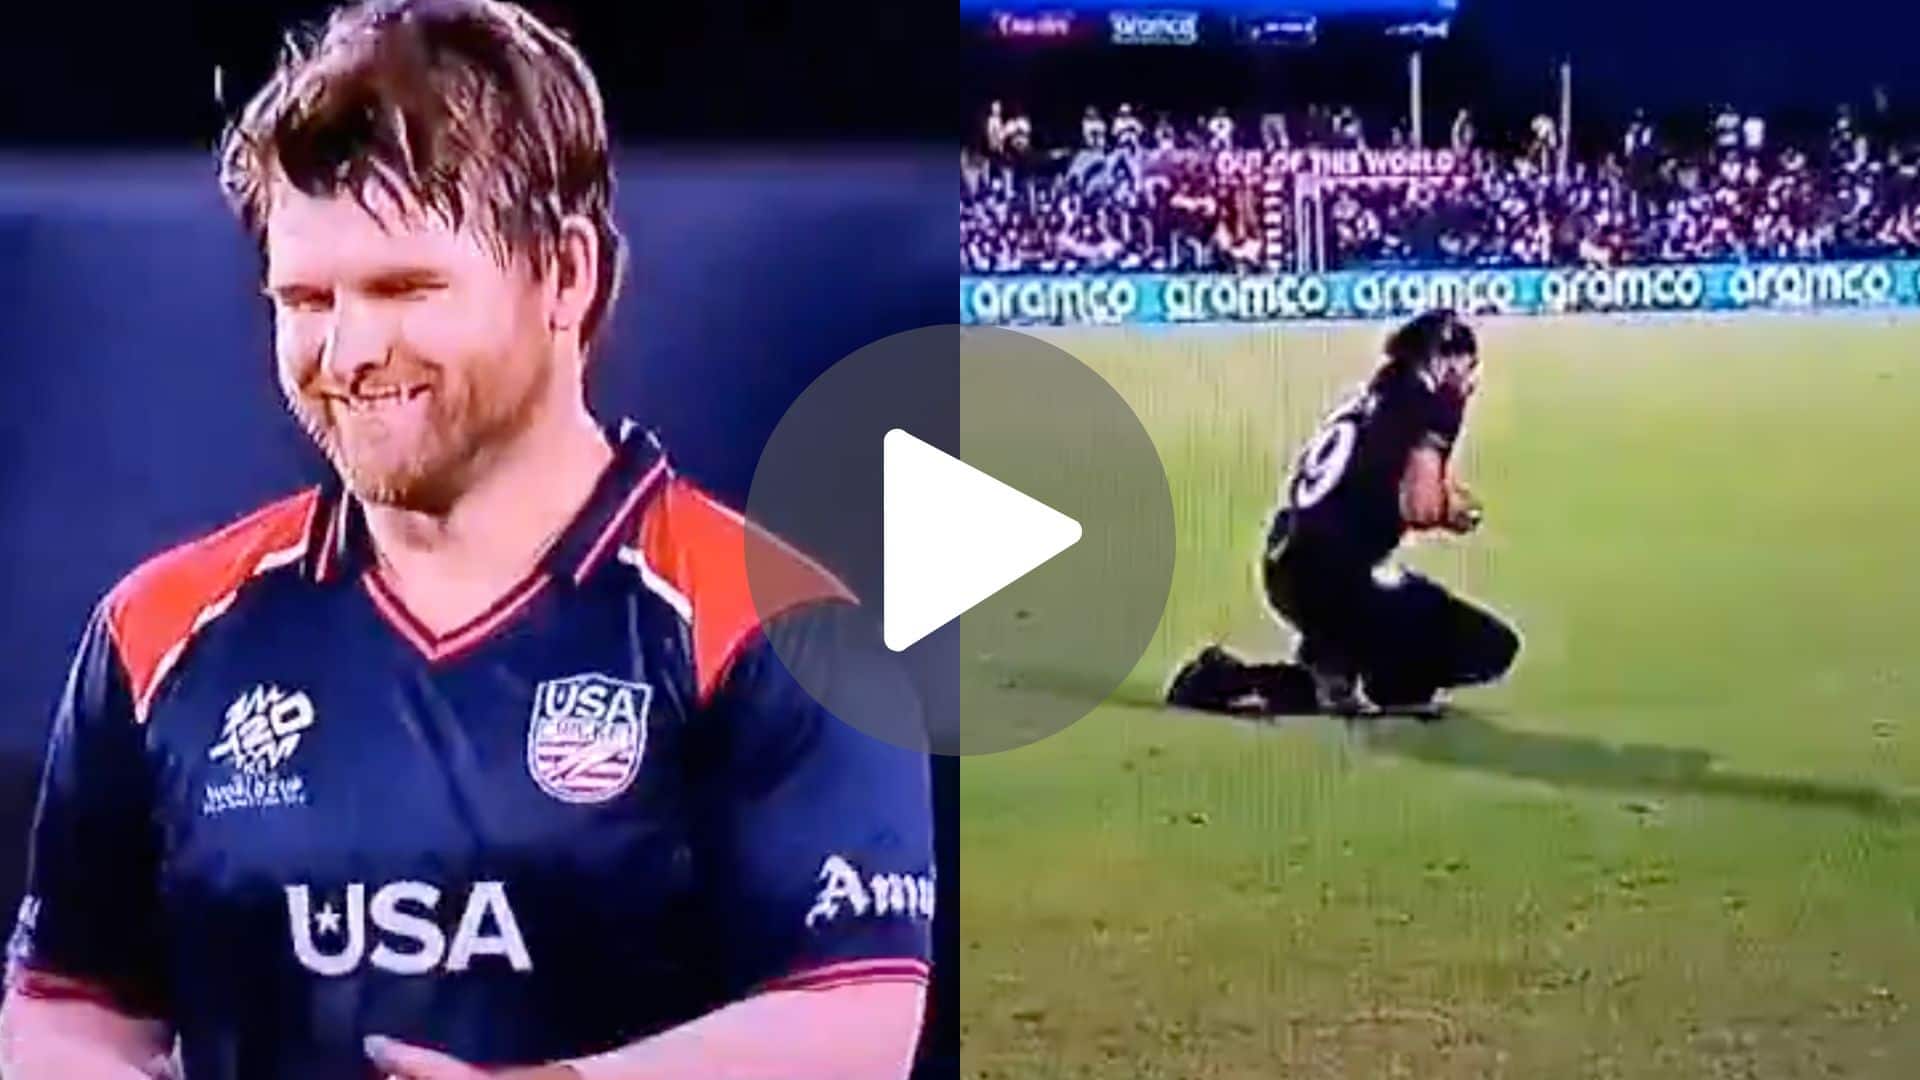 [Watch] Ex-NZ Player Corey Anderson 'Smiles Like A Devil' As He Gets A Wicket On 1st Ball